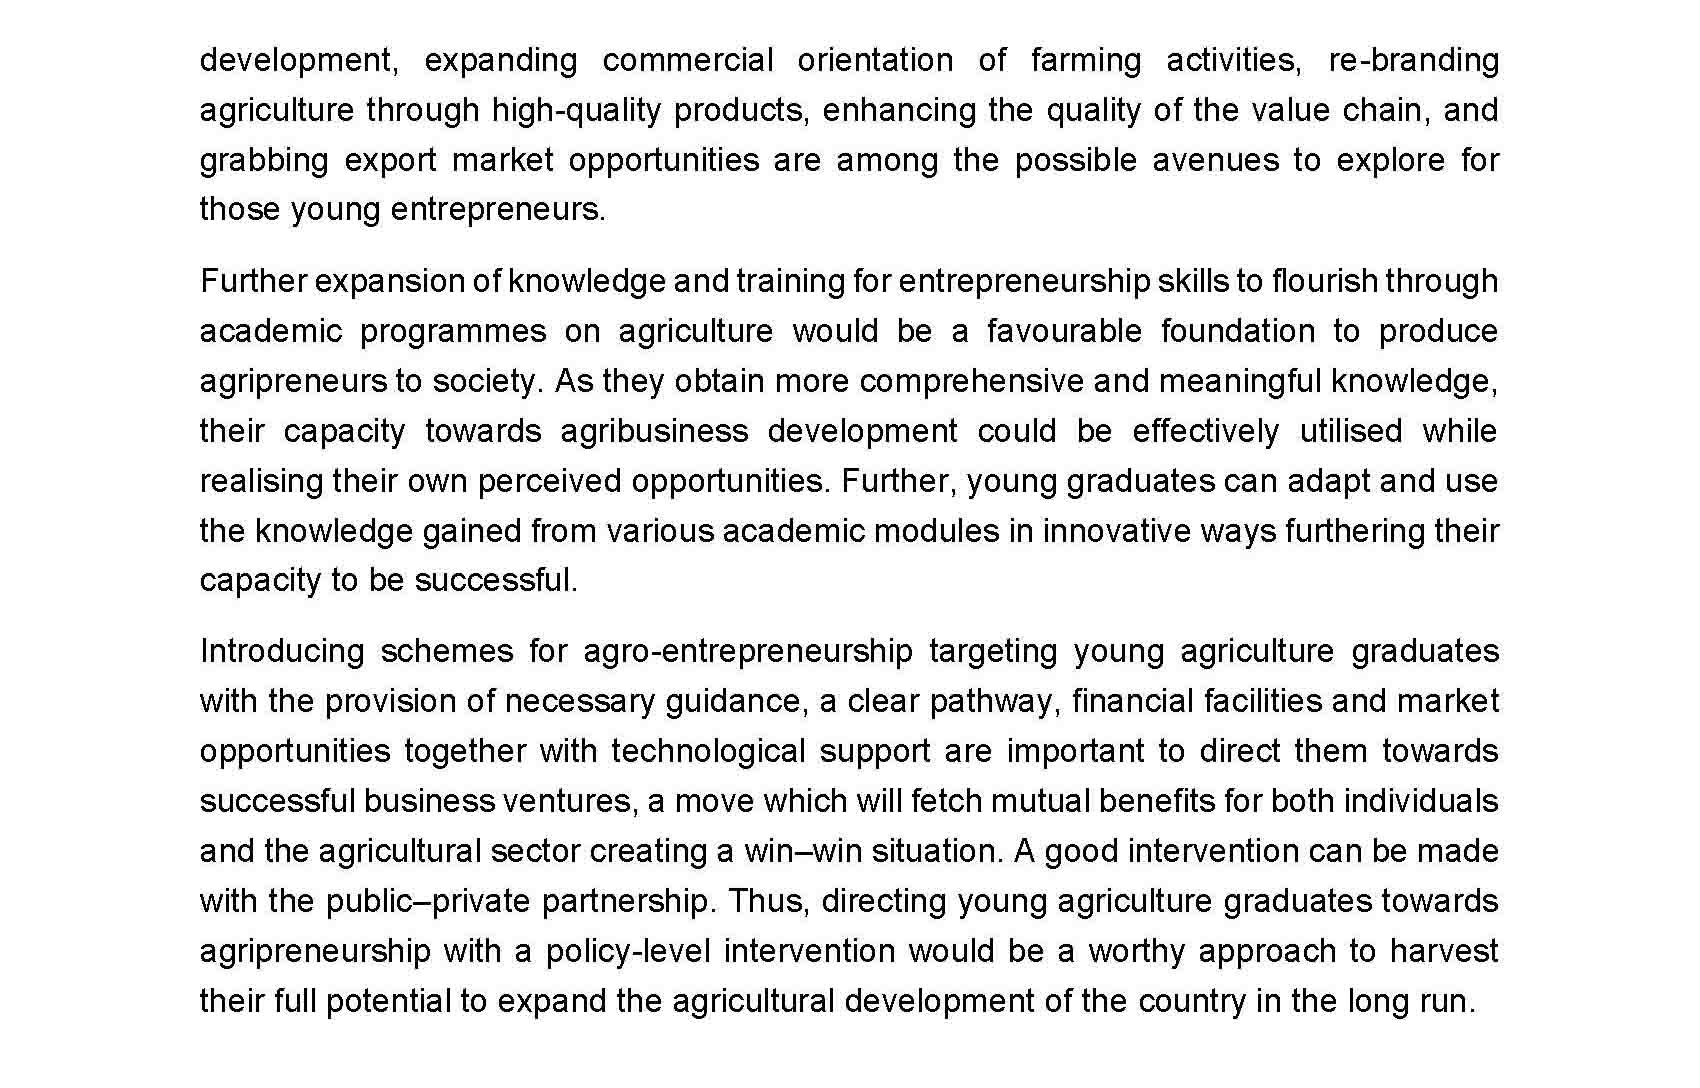 Motivating agriculture graduates with entrepreneurship opportunities Page 6